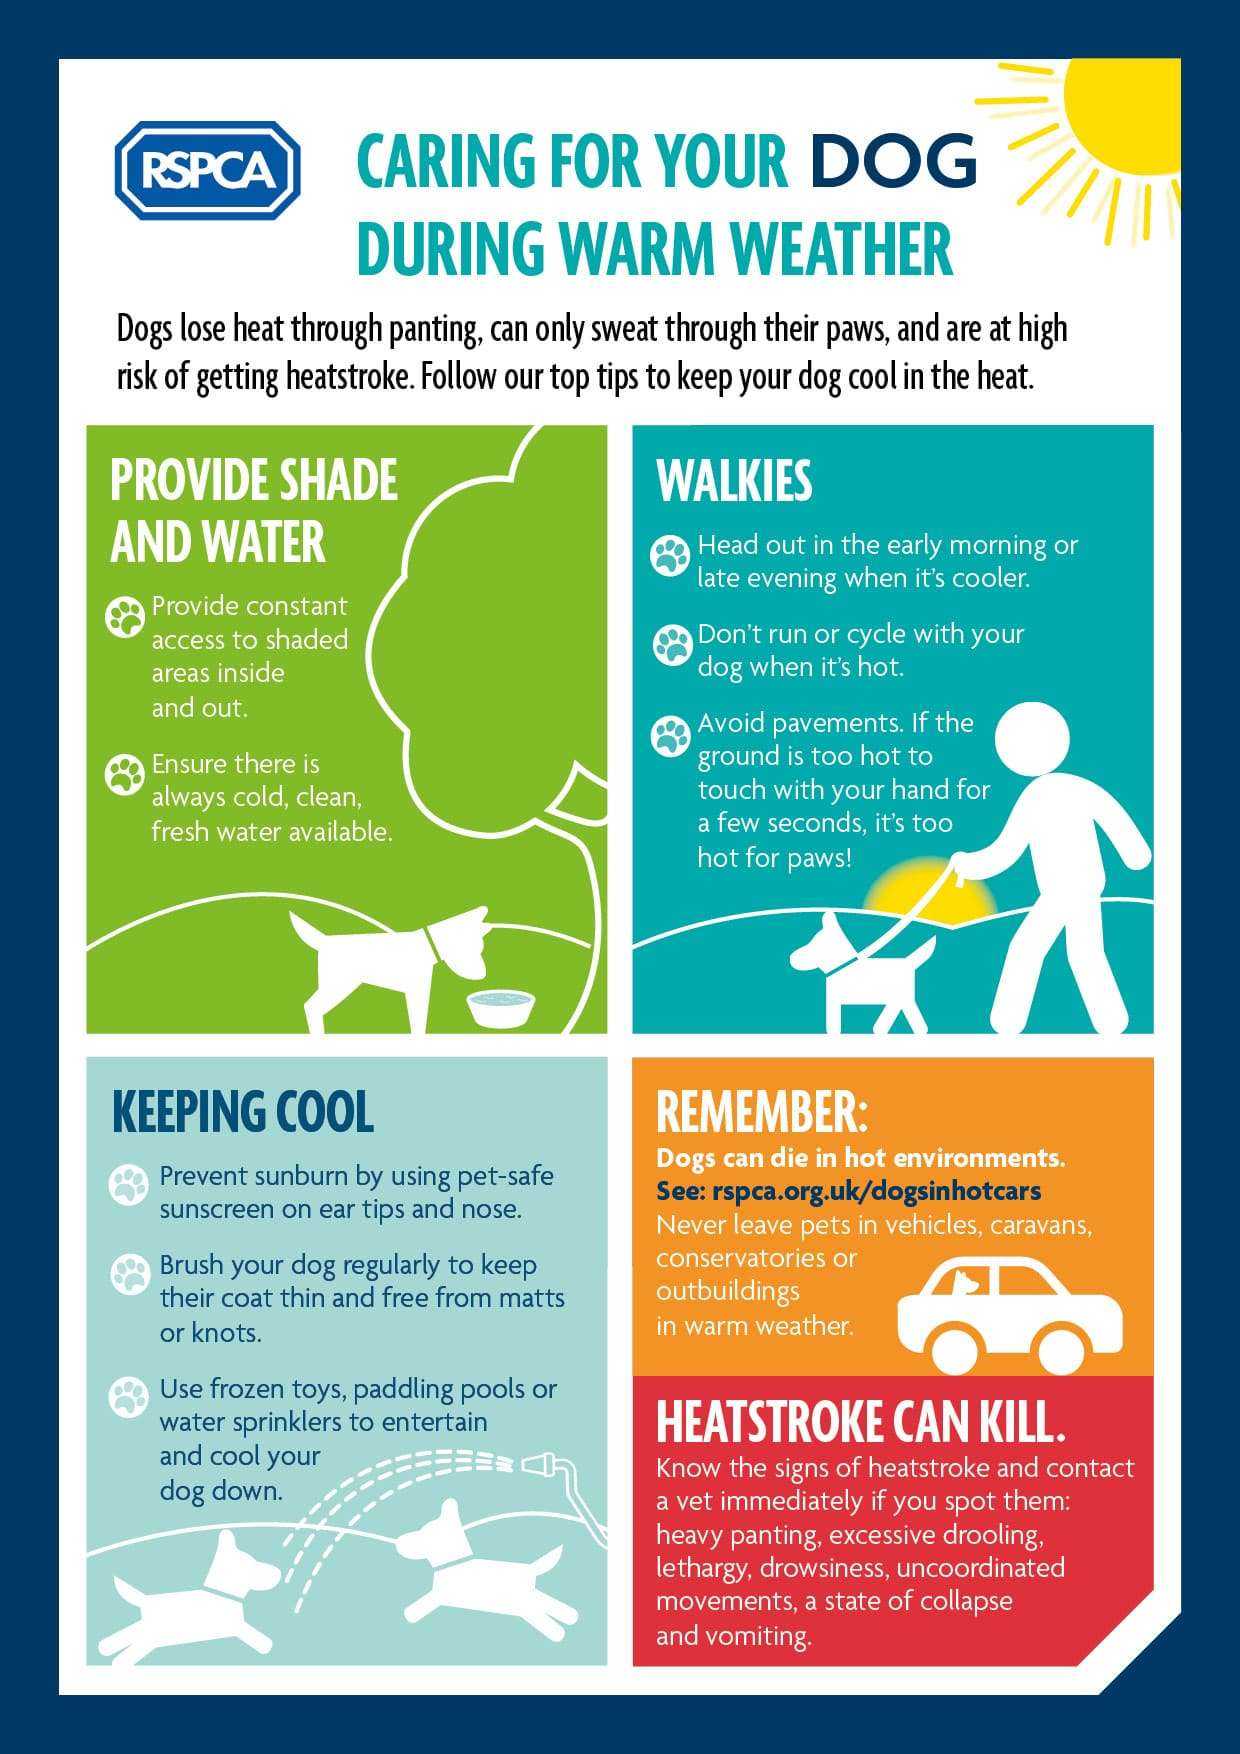 https://www.rspca.org.uk/documents/1494939/0/807_Caring+for+your+dog+in+the+heat_final+%283%29.jpg/3b7cca1f-22e3-ddc2-5097-08e43c63c5dc?t=1655725488201